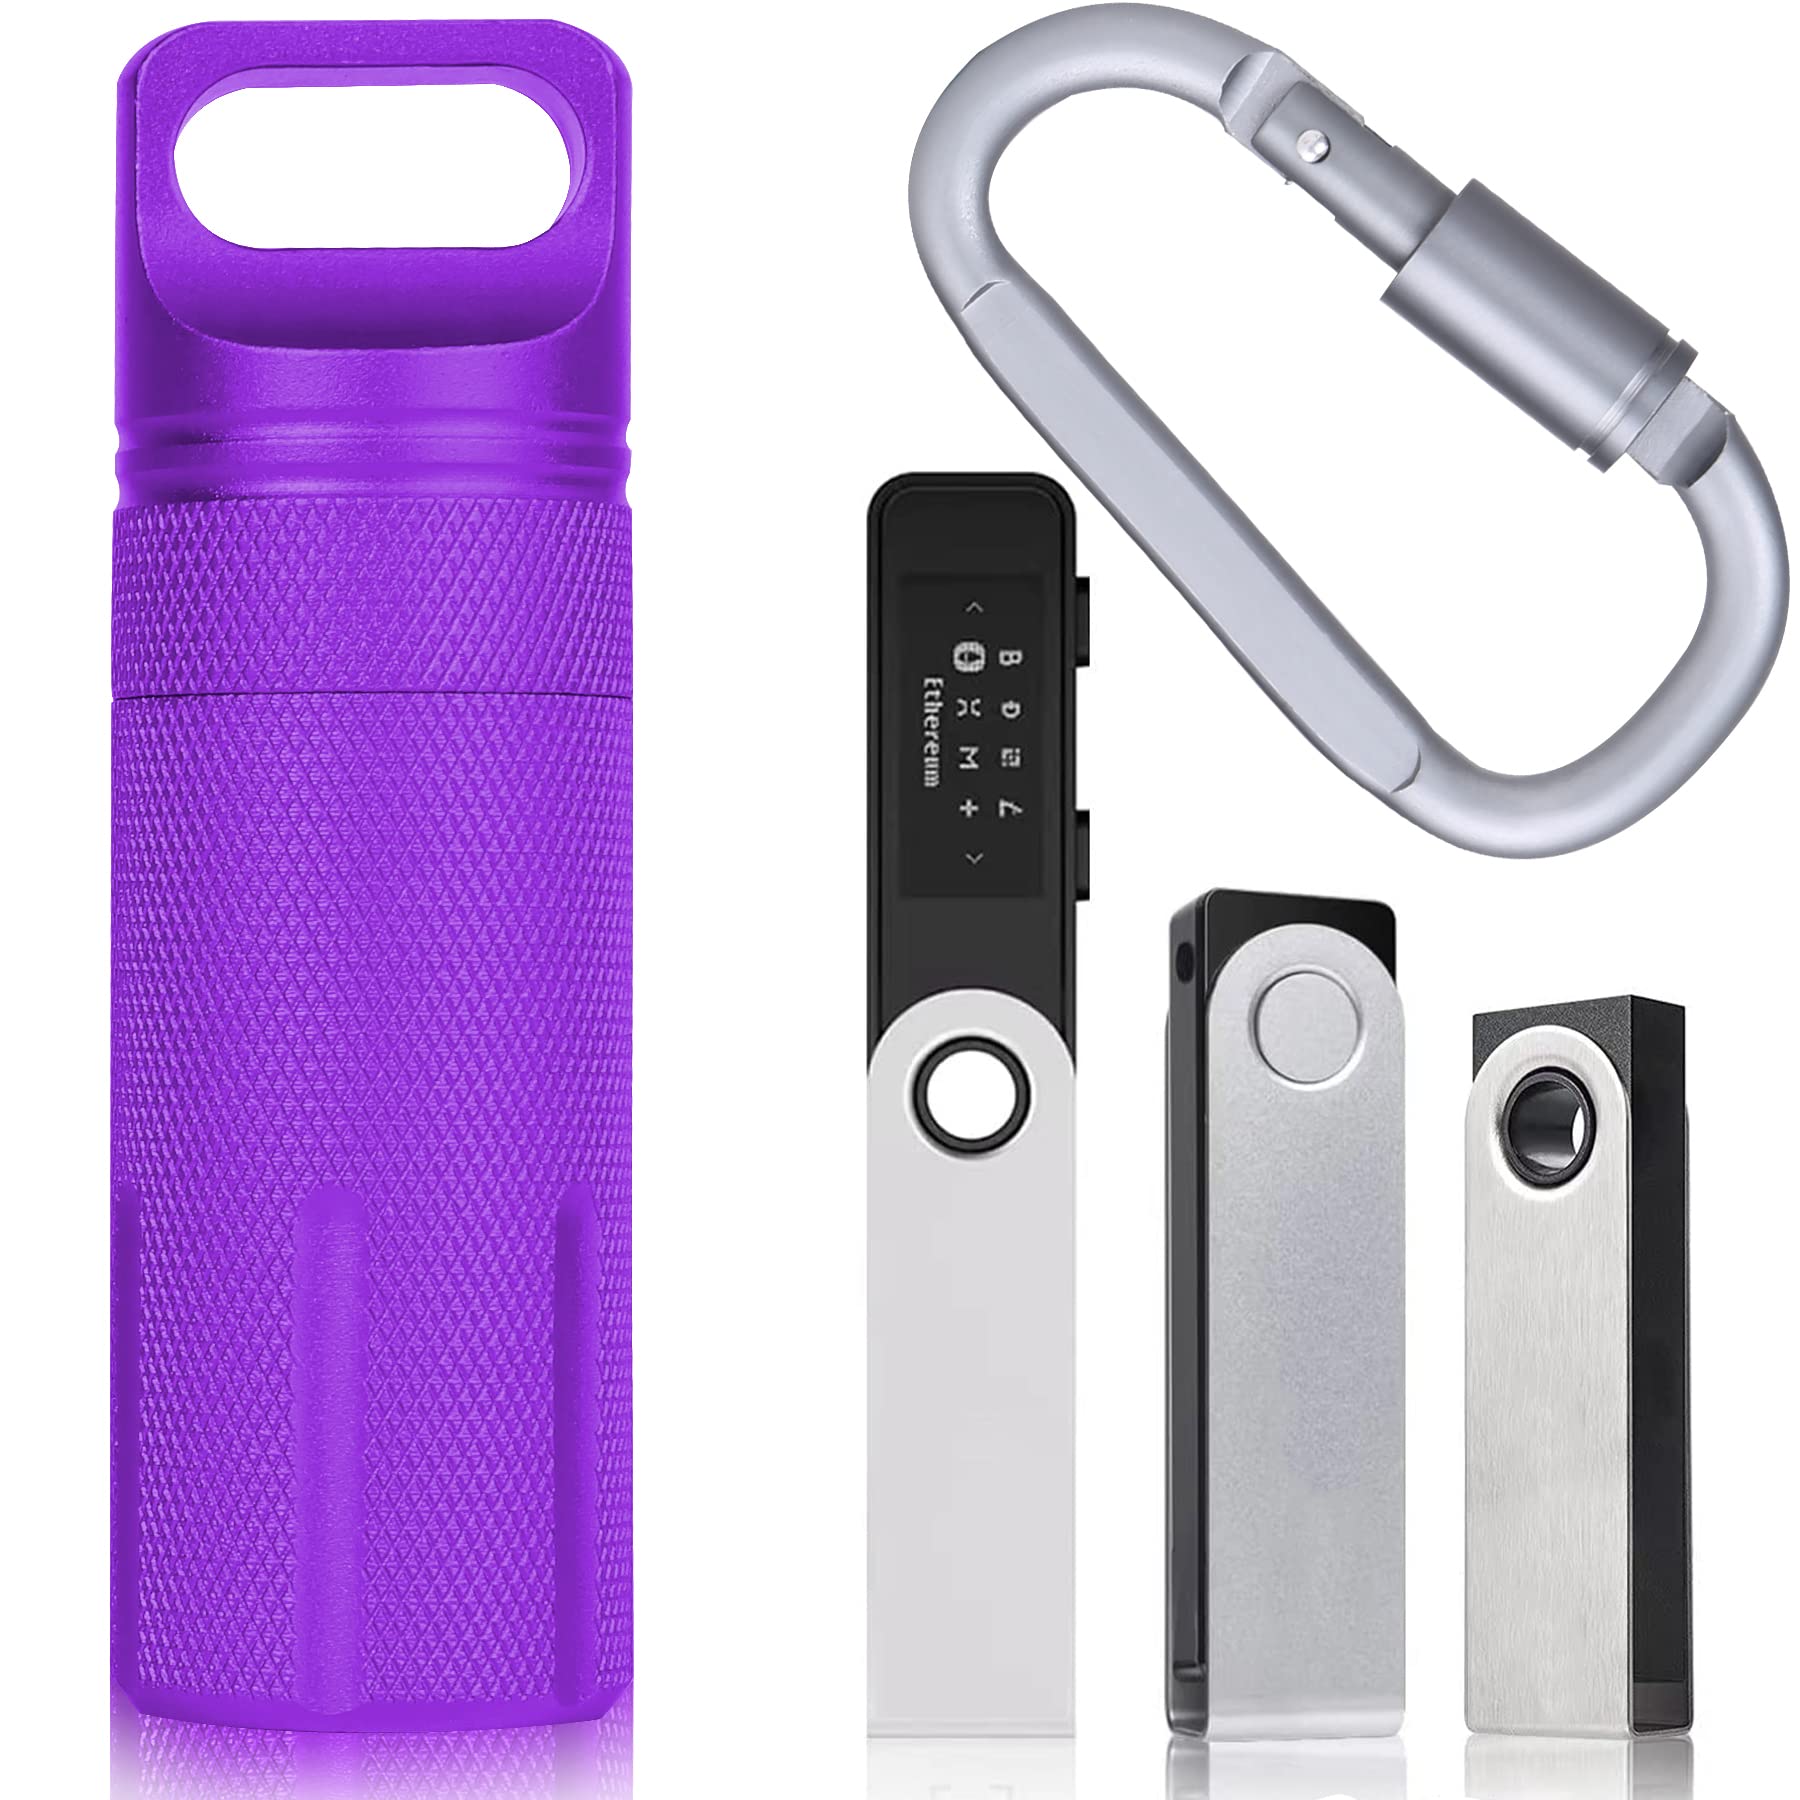 Aenllosi Aluminum Alloy Carrying Case Compatible with Ledger Nano S S Plus BTC Bitcoin Wallet Hardware Cosmic Purple並行